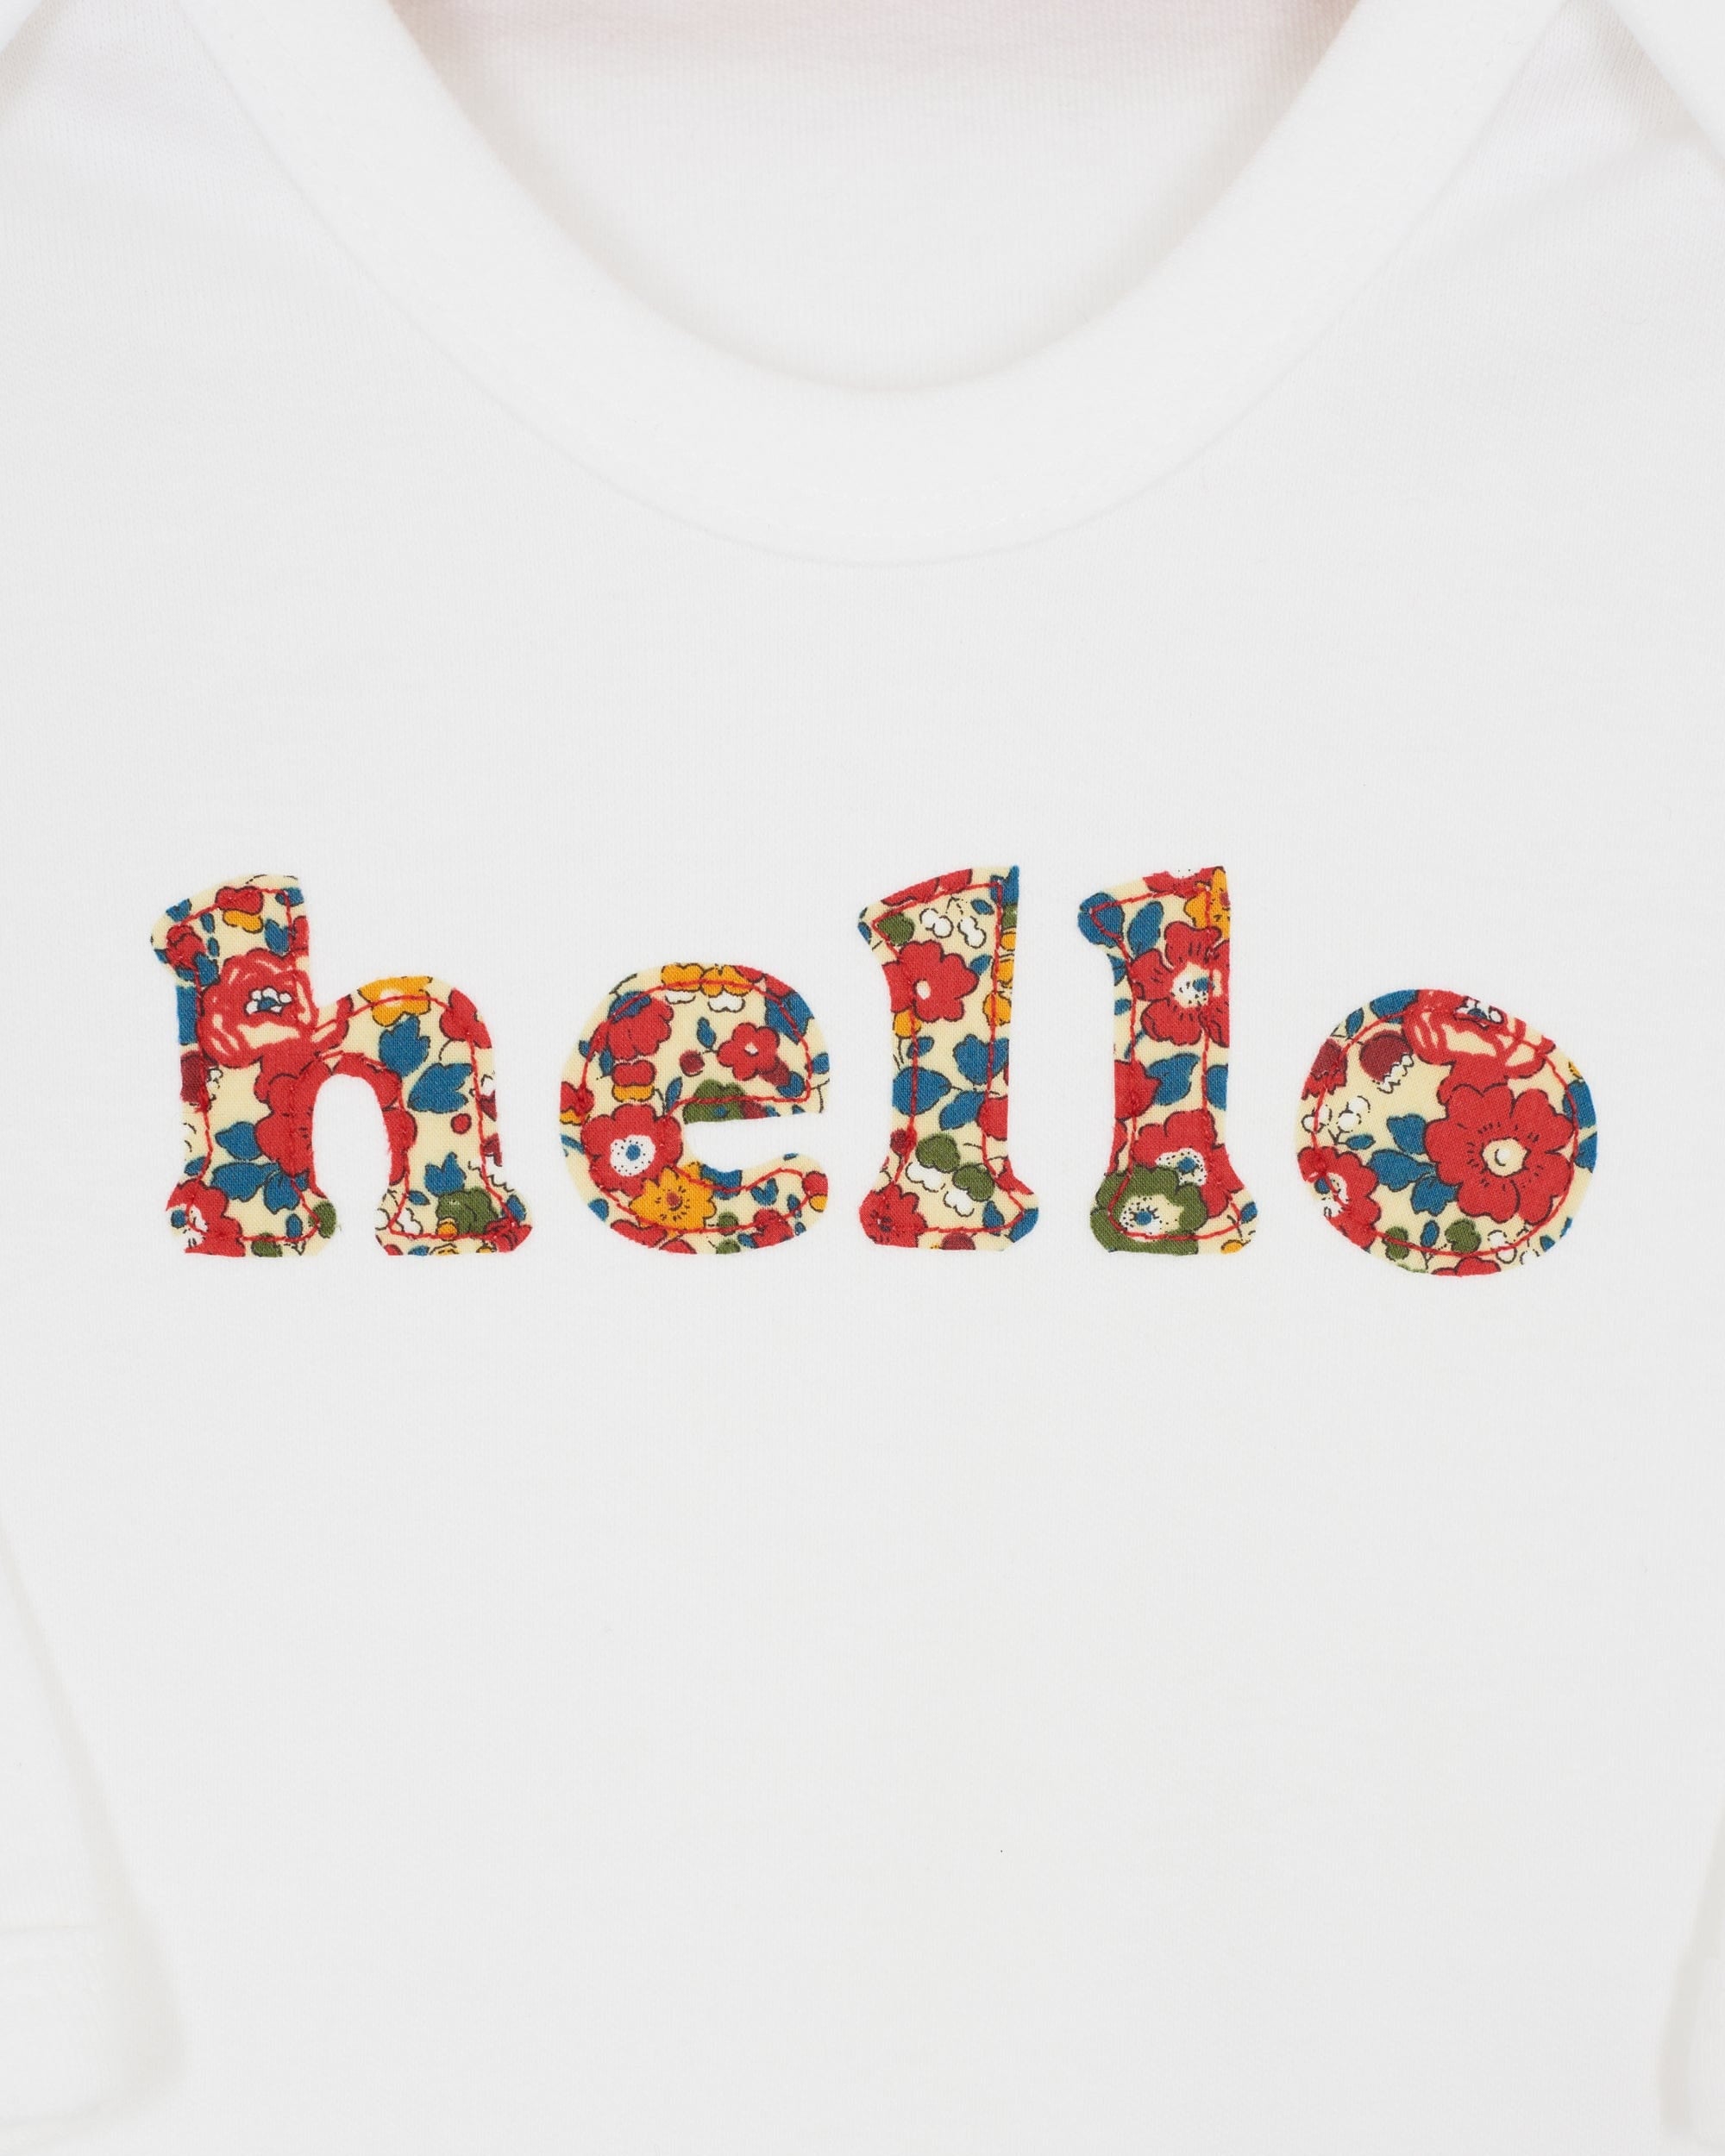 Magnificent Stanley Romper 'hello' Cotton Romper in Choice of Liberty print